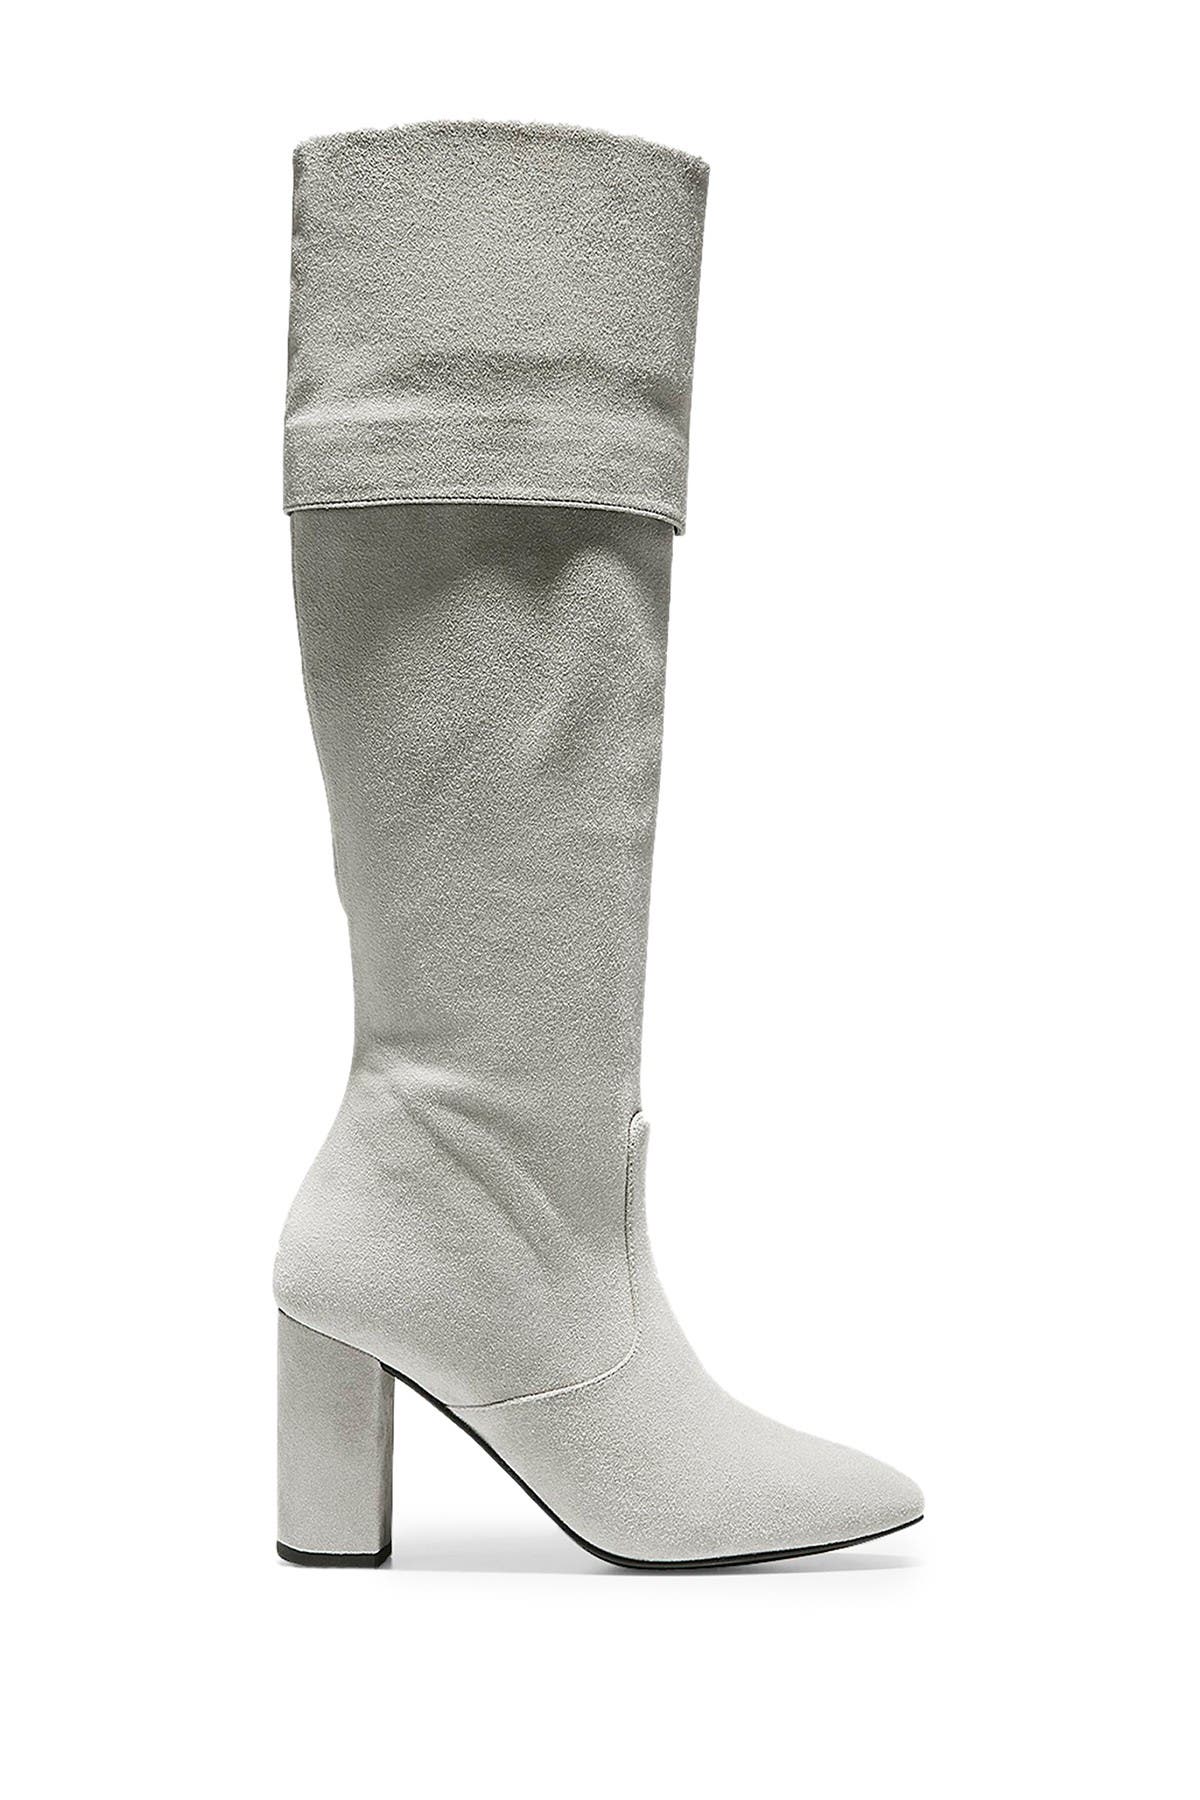 Cole Haan | Tess Suede Cuff Boot 